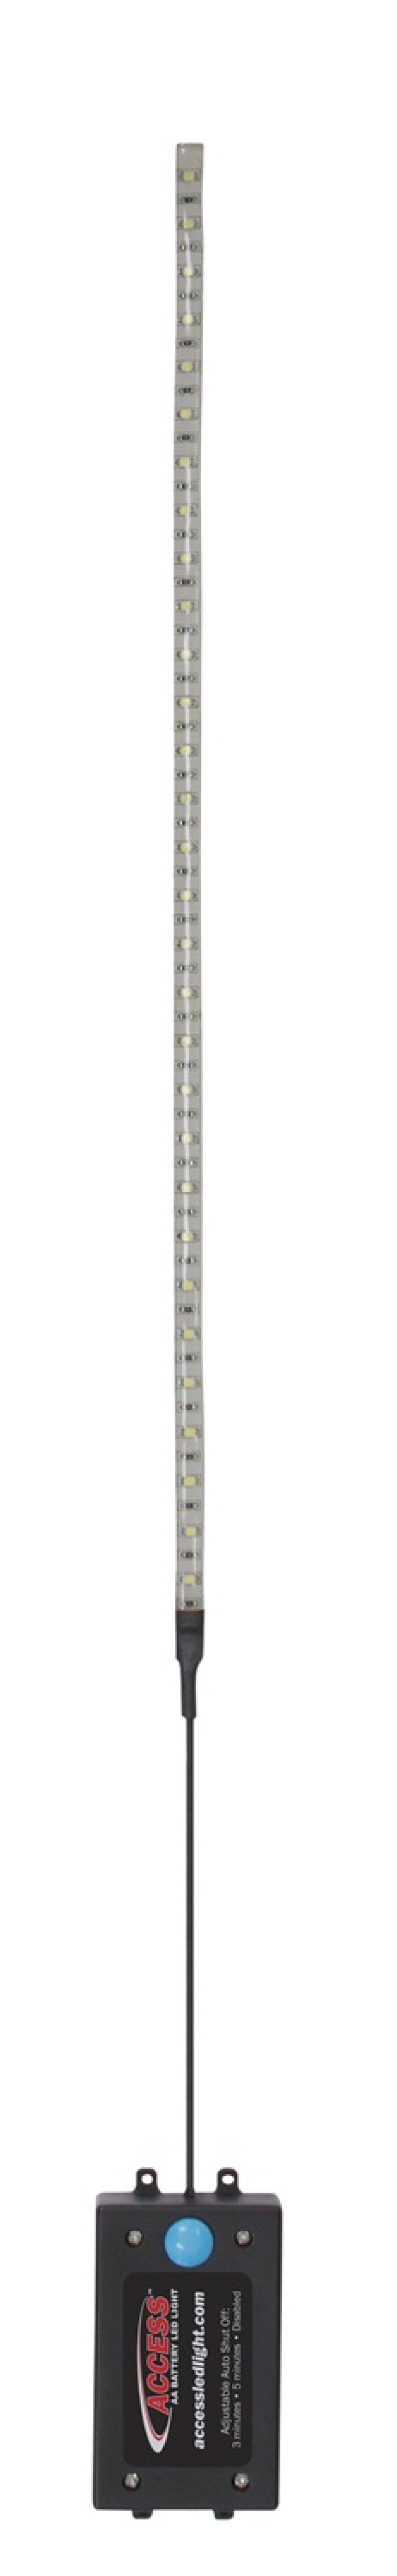 Access Accessories 12in LED Strip Light - 1 Single Pack 70380 Main Image